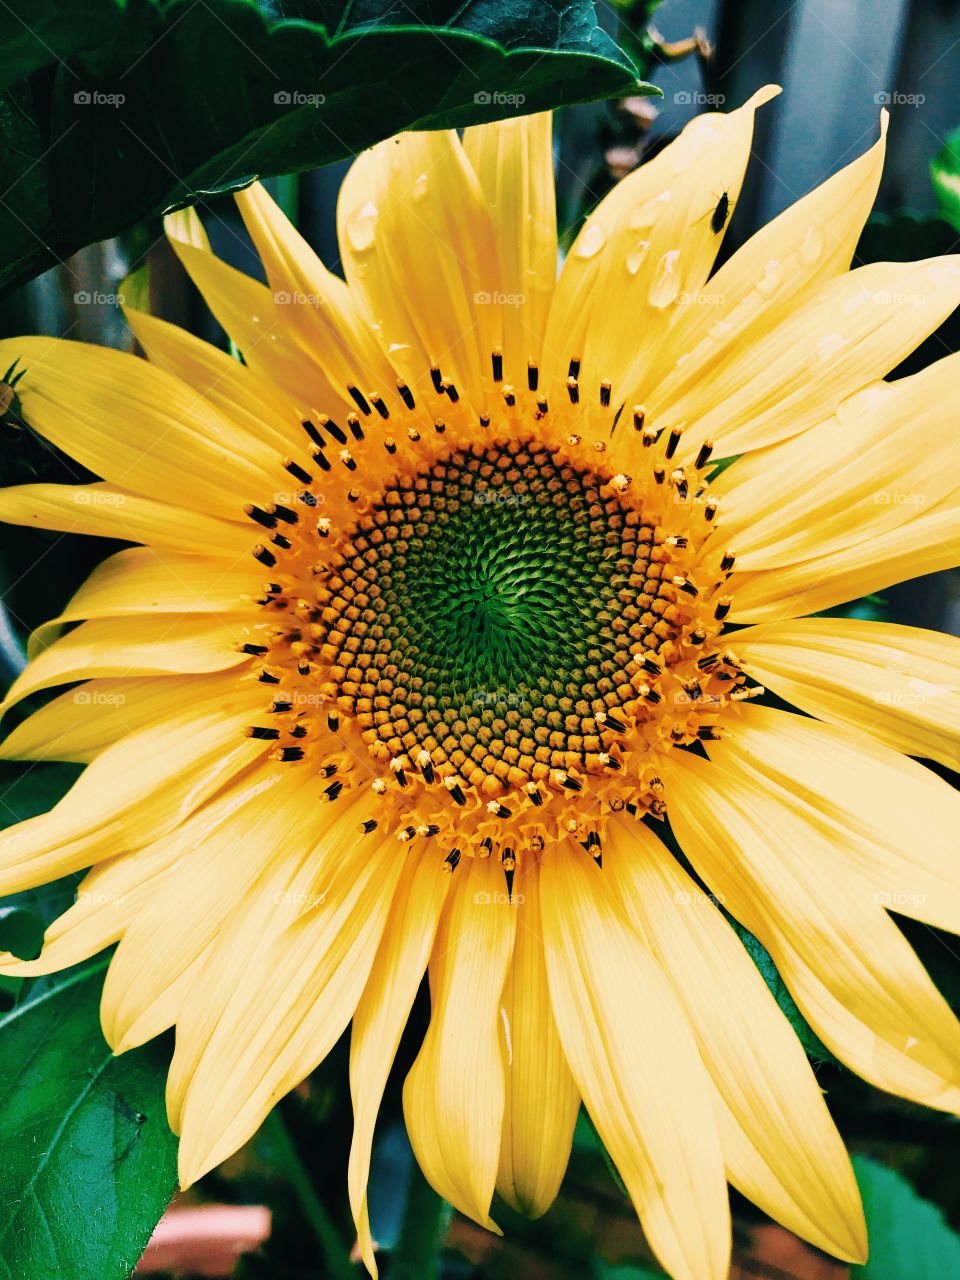 Beautiful closeup of flowering yellow sunflower . There are water droplets and a bug on the petals